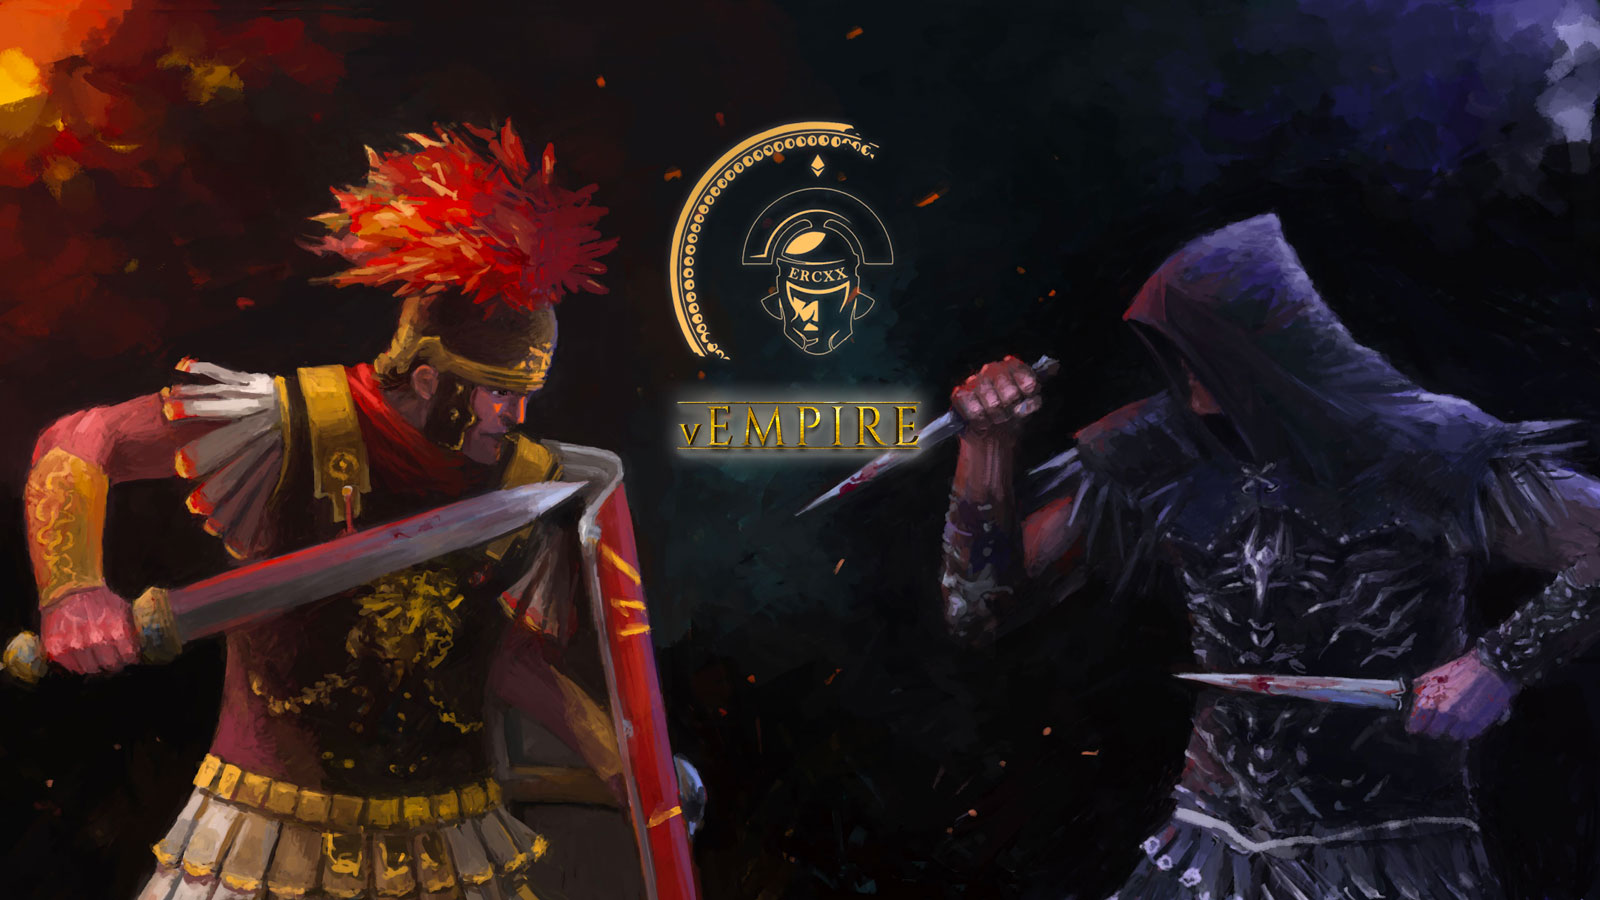 vEmpire: The Beginning – vEmpire DDAO Launches Its First Play-To-Earn Game